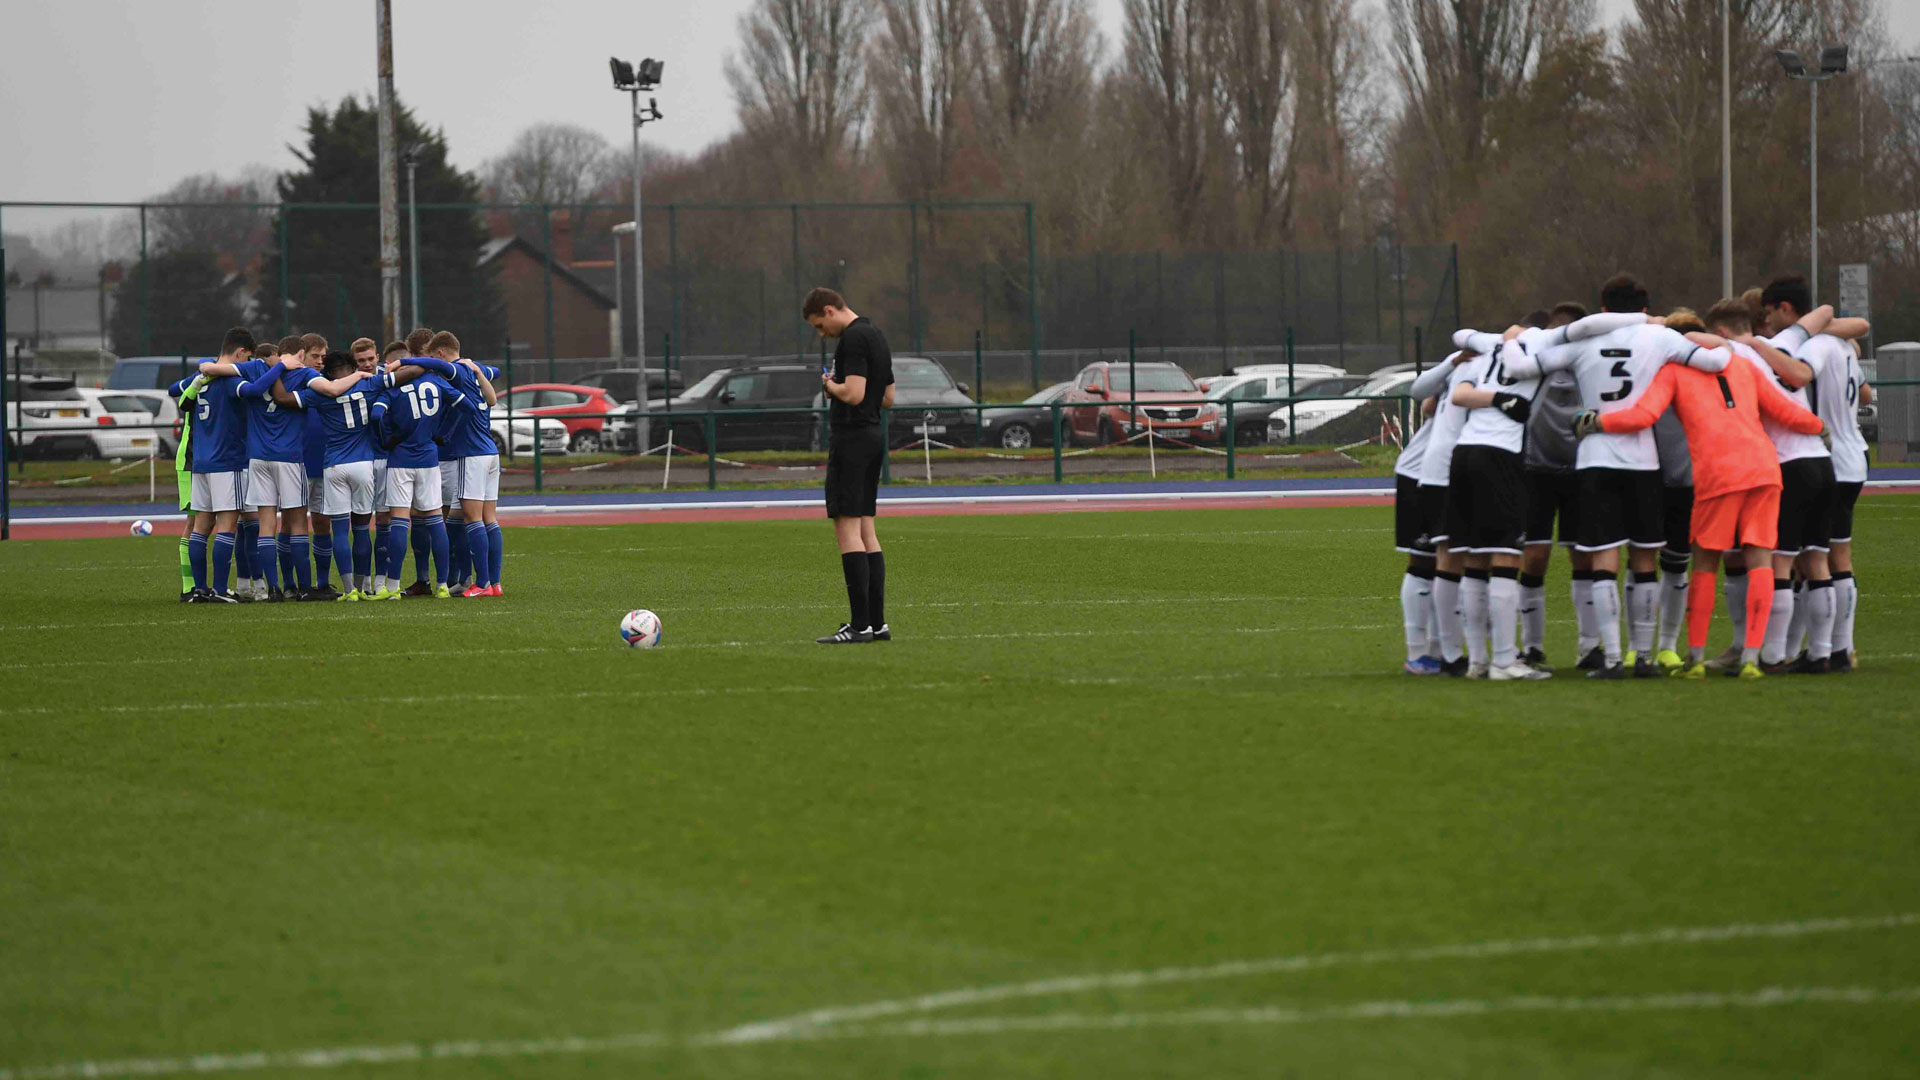 Cardiff City and Swansea City prepare for their U18 clash...